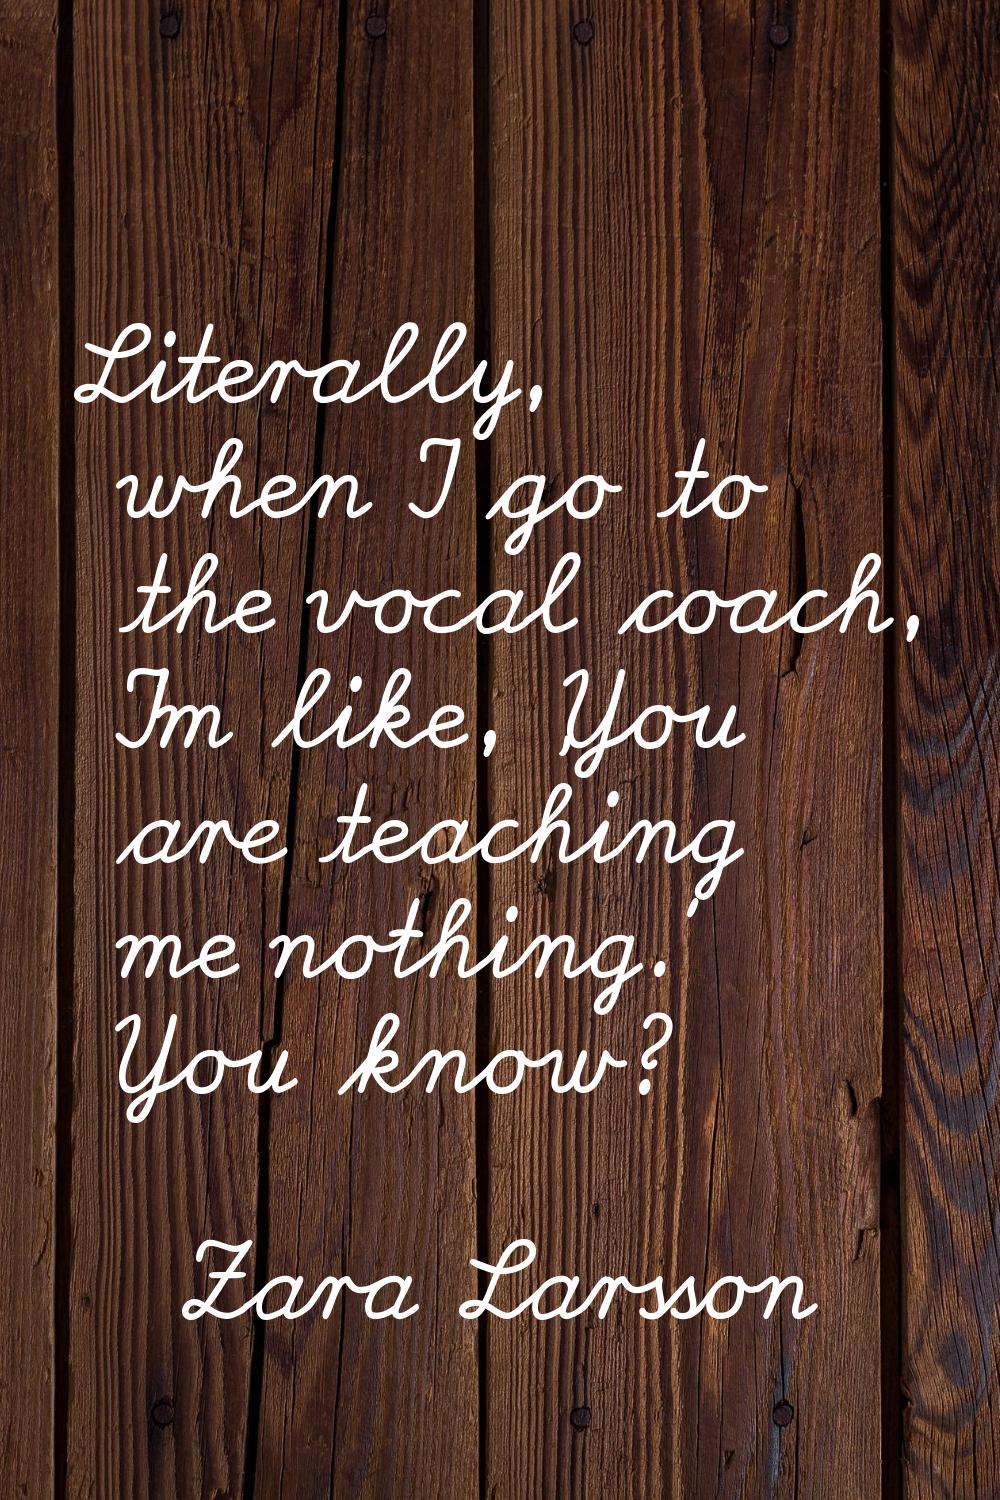 Literally, when I go to the vocal coach, I'm like, 'You are teaching me nothing.' You know?